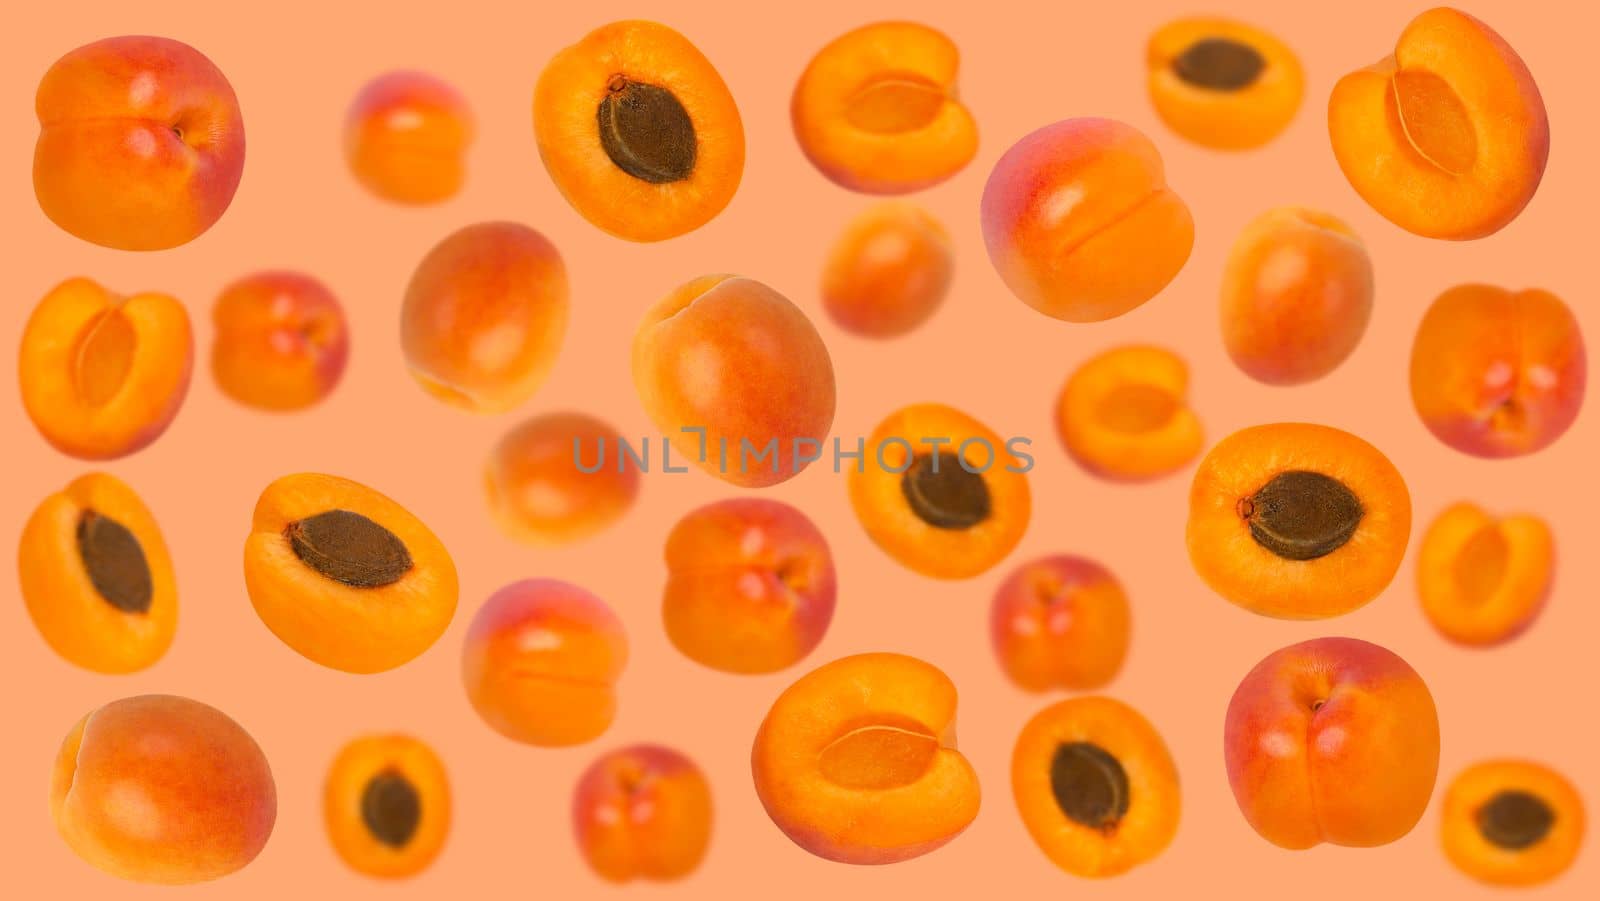 Falling apricot ruits on orange surface for advertisement by Ciorba